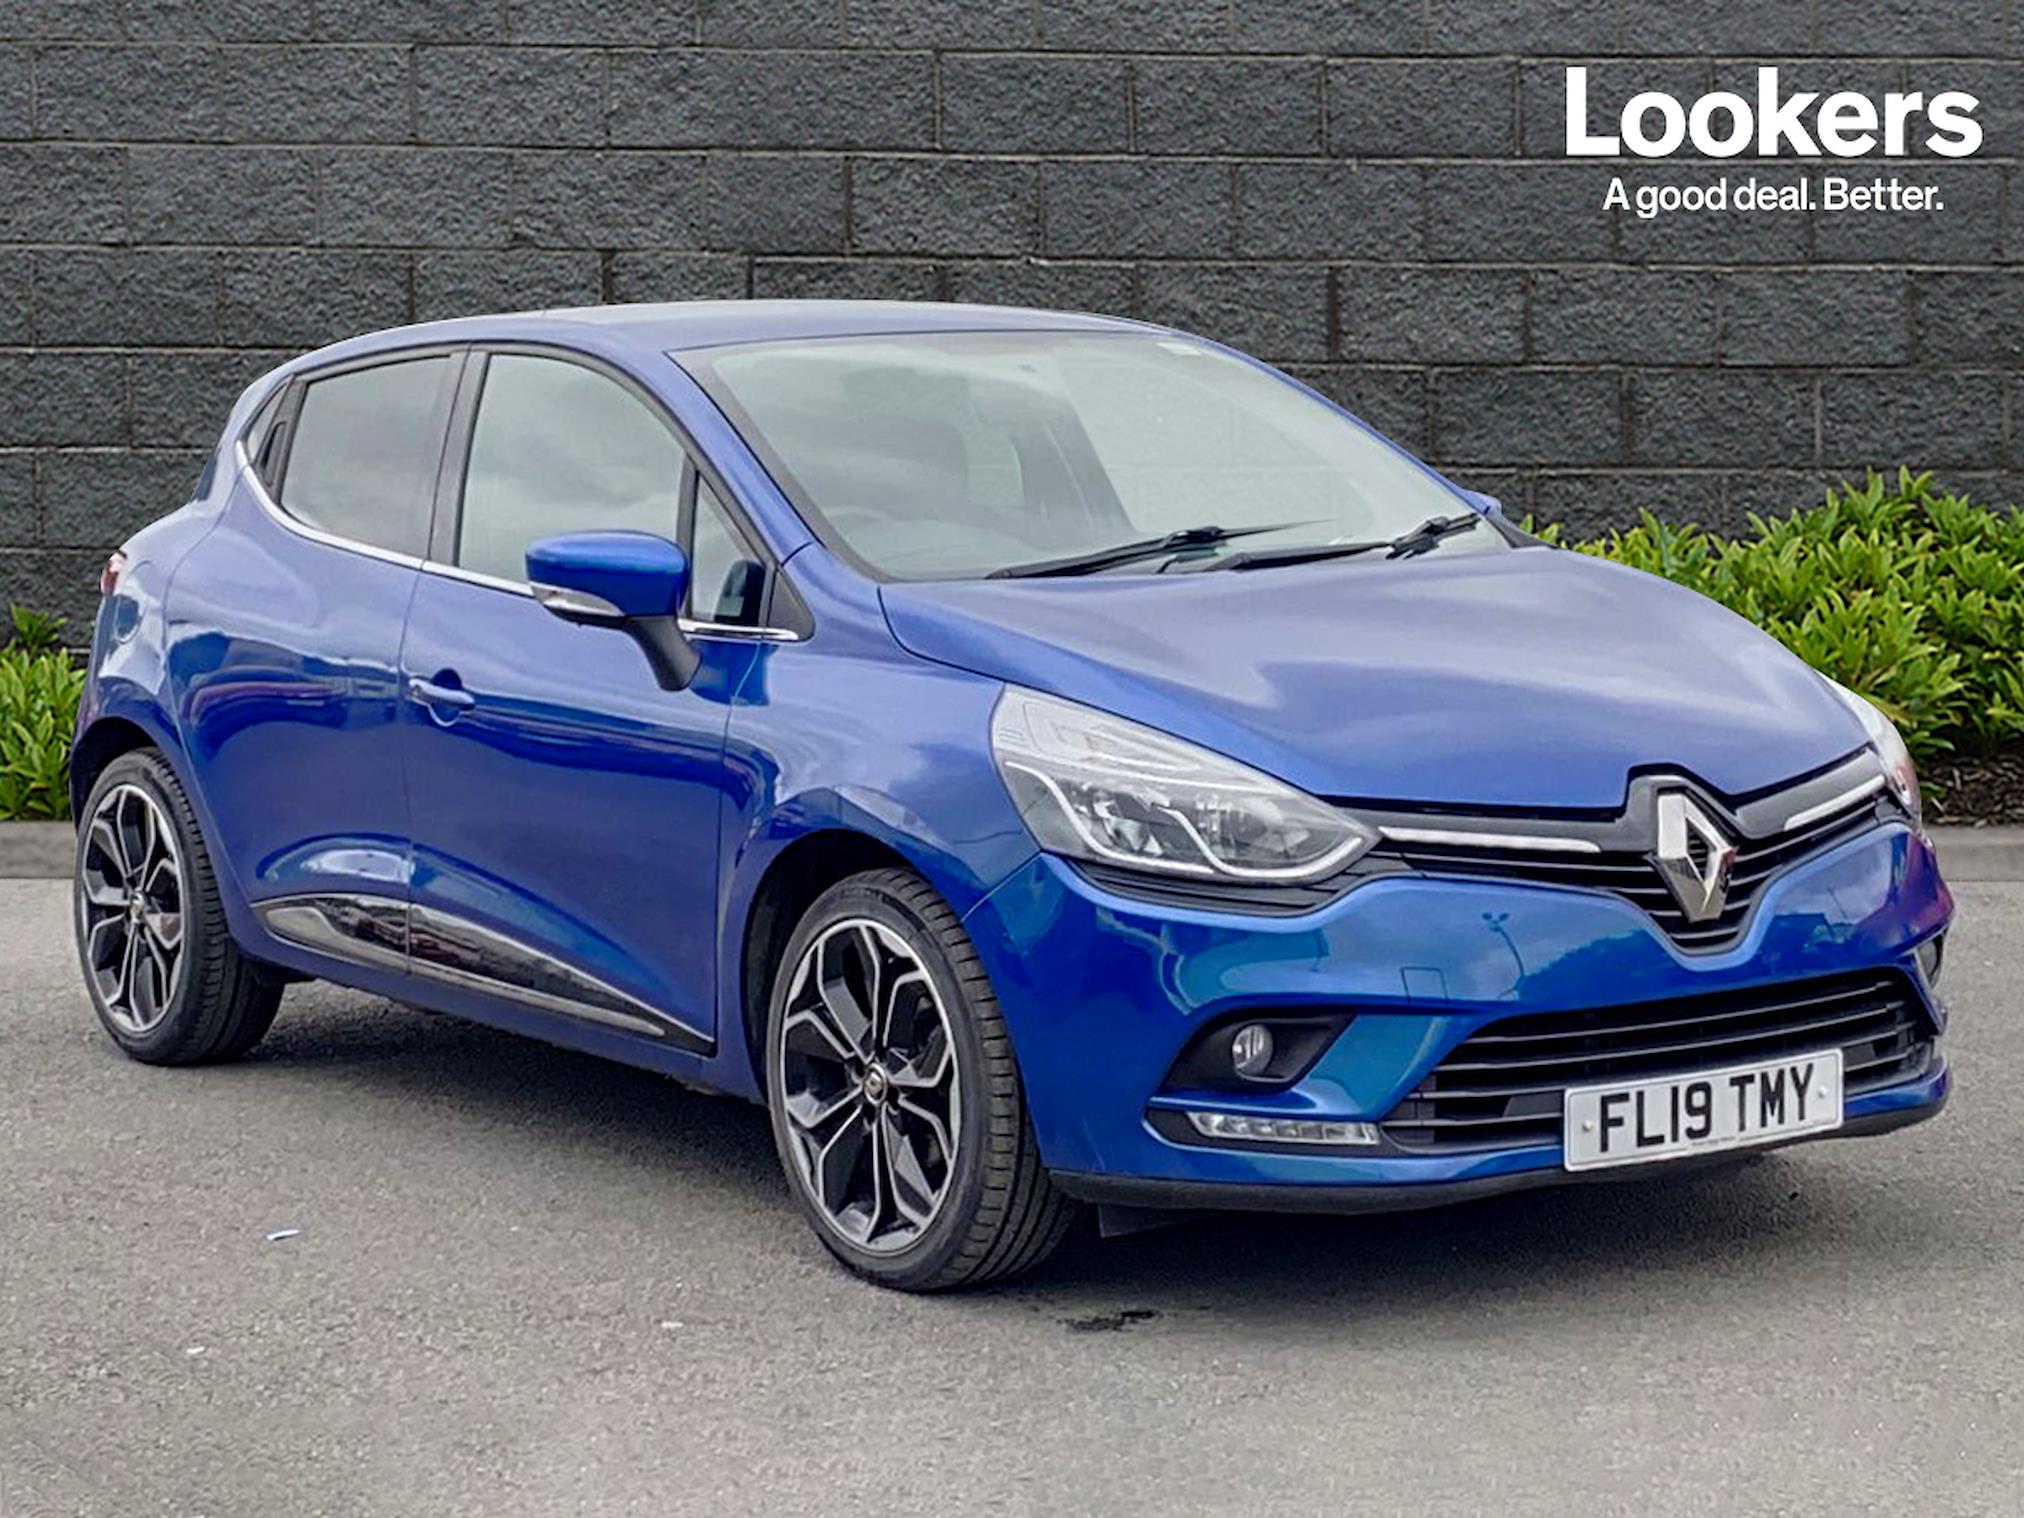 Used RENAULT CLIO 0.9 Tce 90 Iconic 5Dr 2019